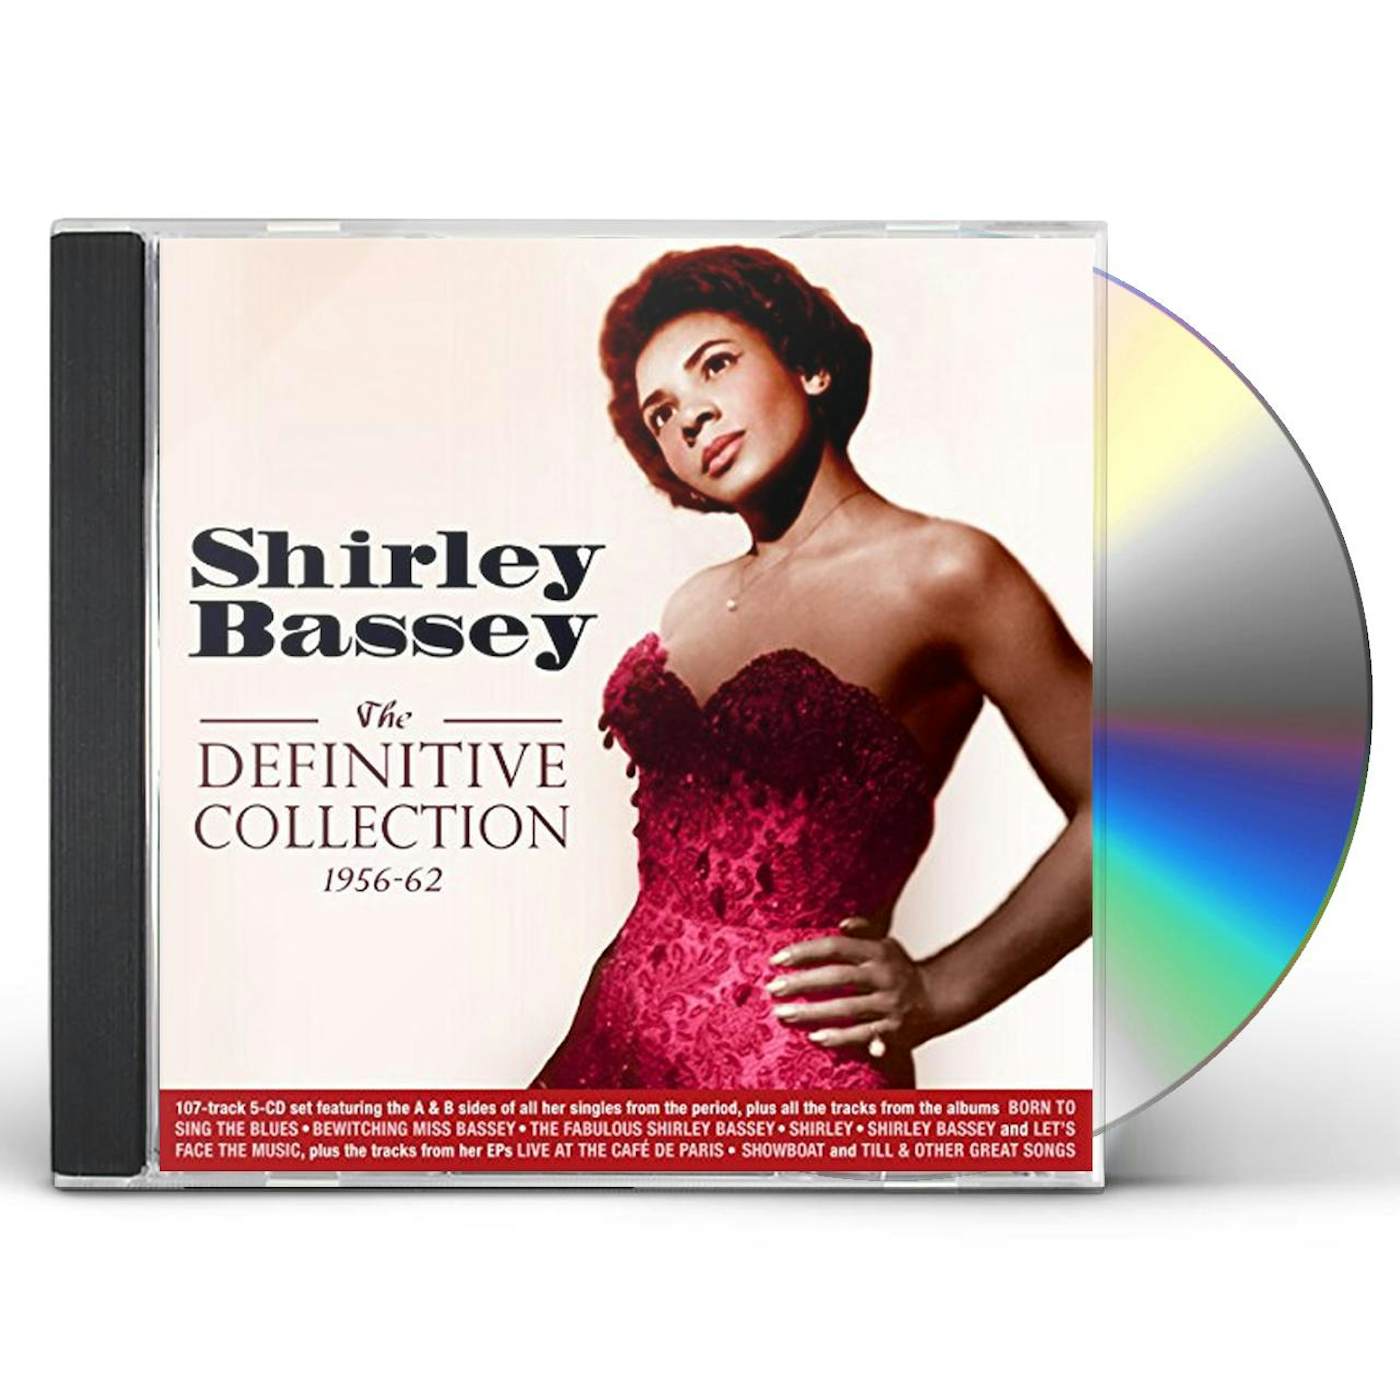 Shirley Bassey DEFINITIVE COLLECTION 1956-62 CD